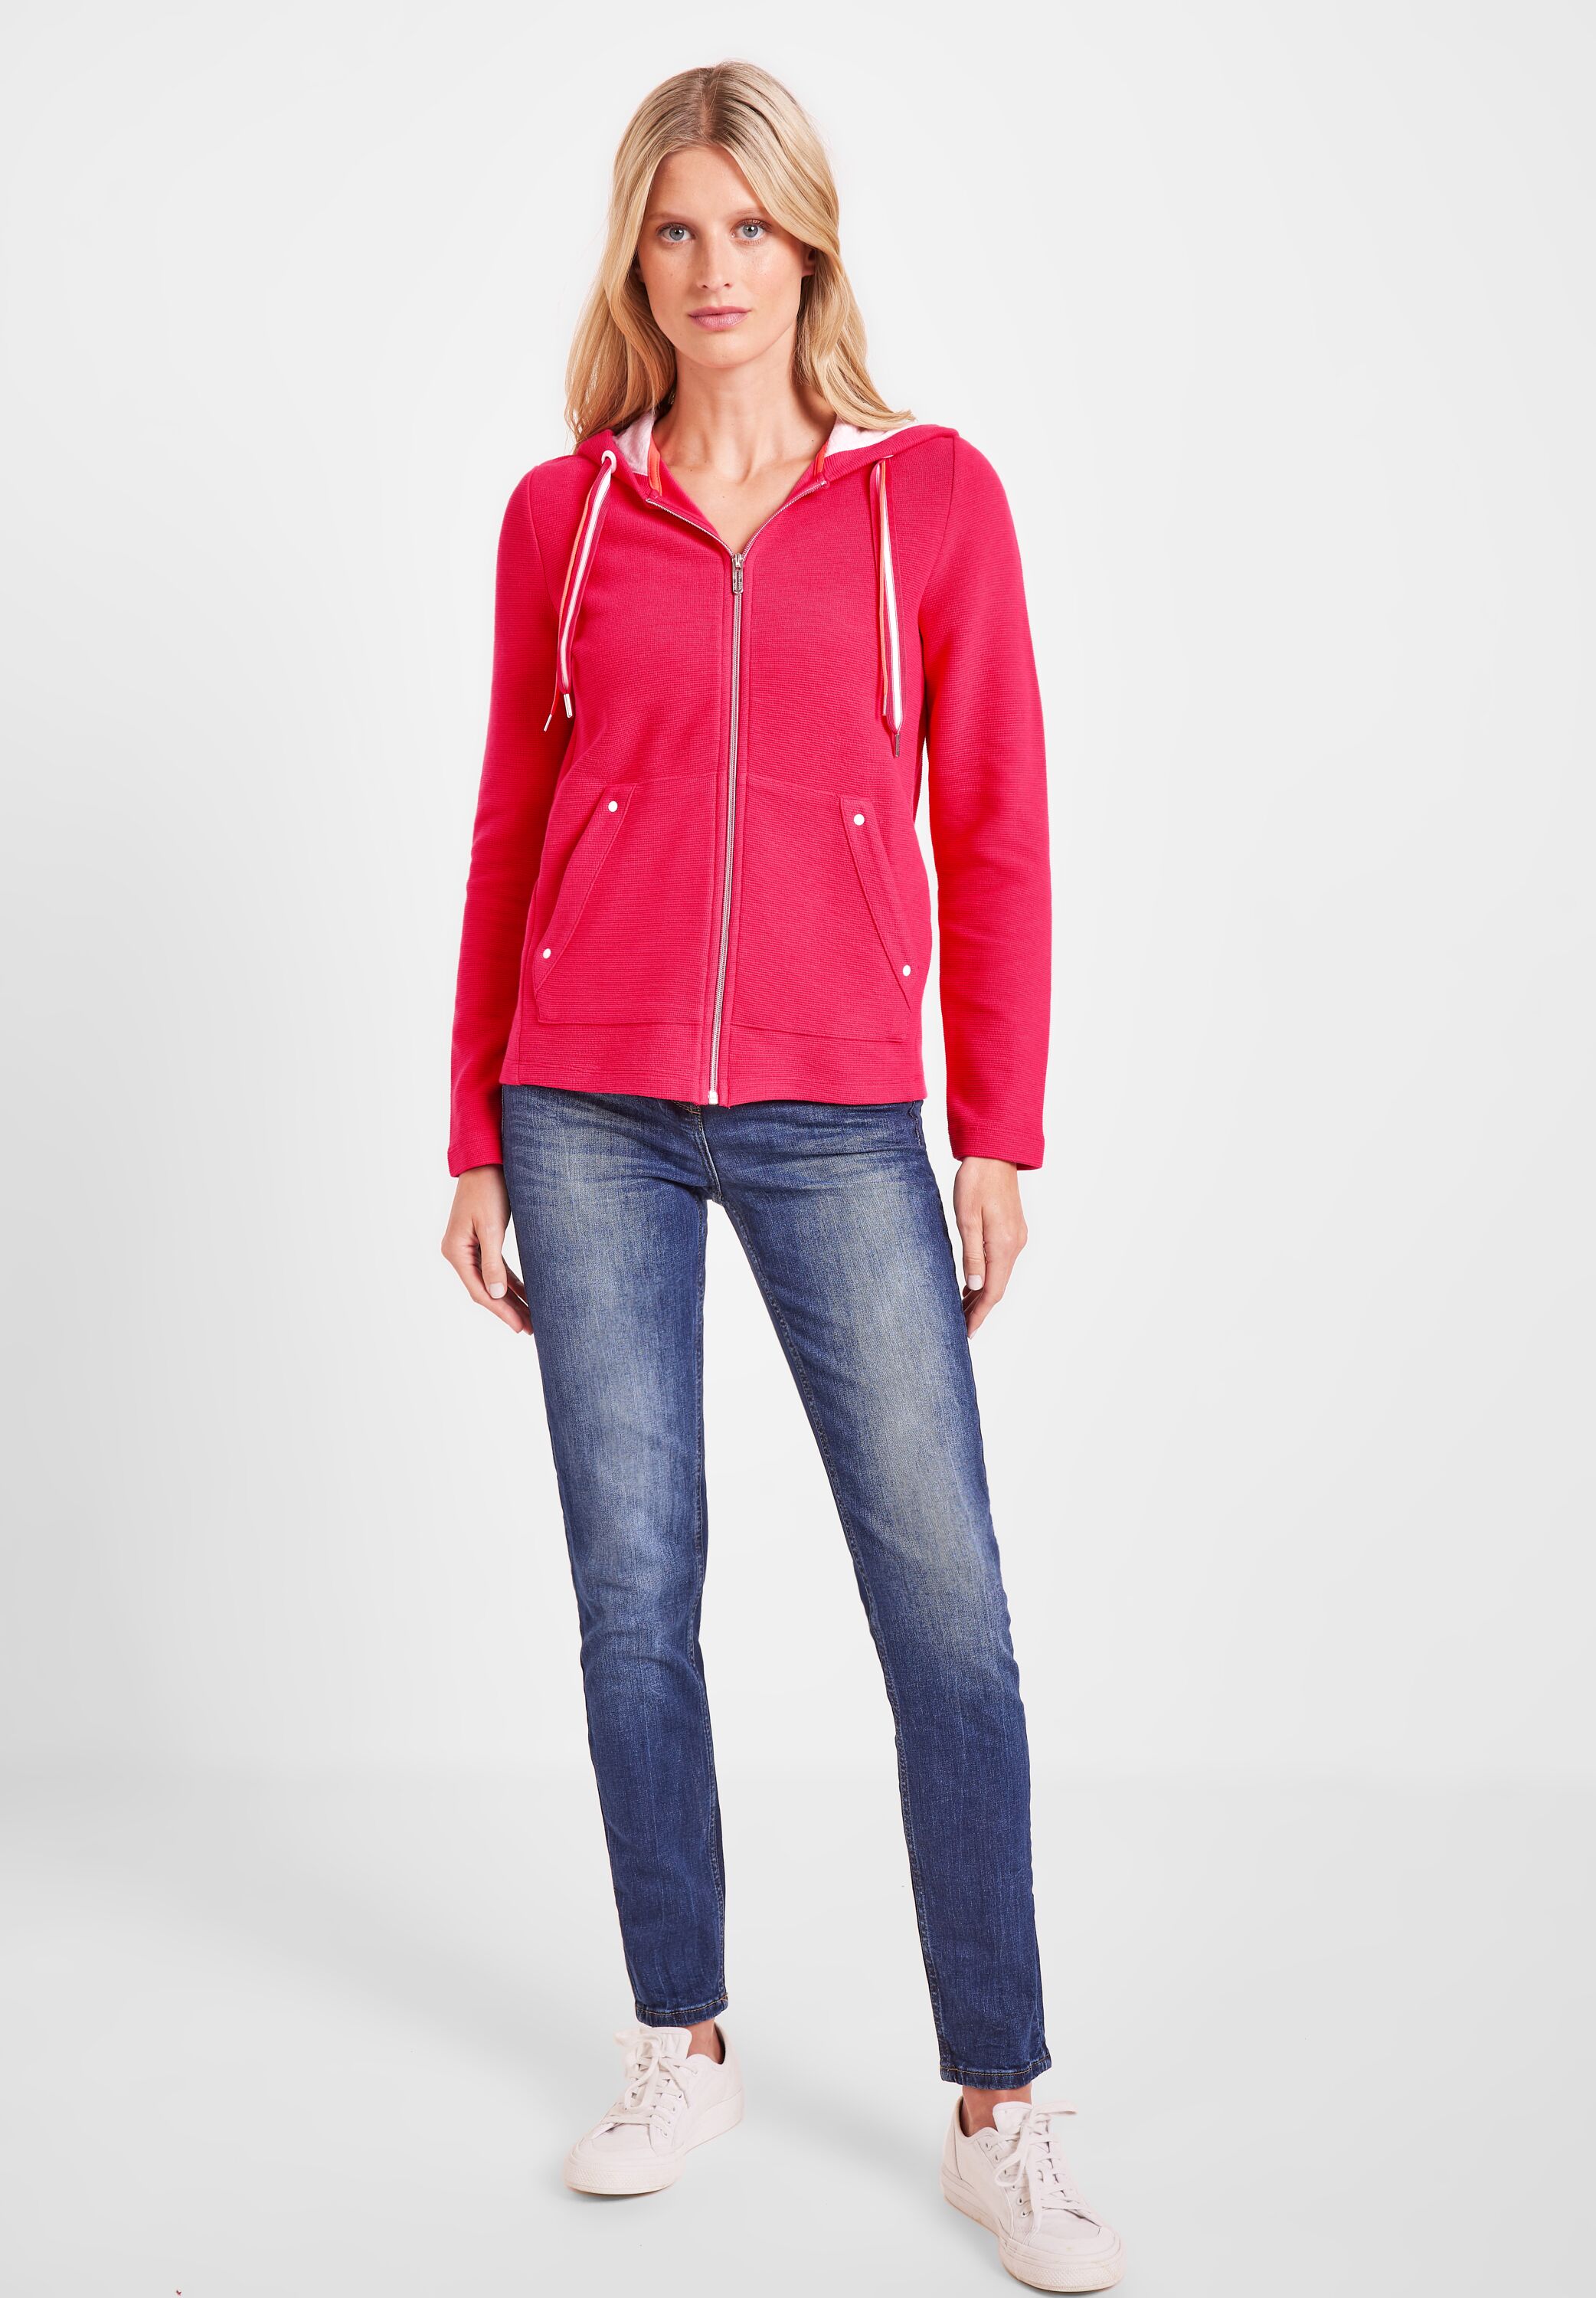 in CECIL CONCEPT Mode im - SALE Shirtjacke Strawberry Red B319398-14472 reduziert